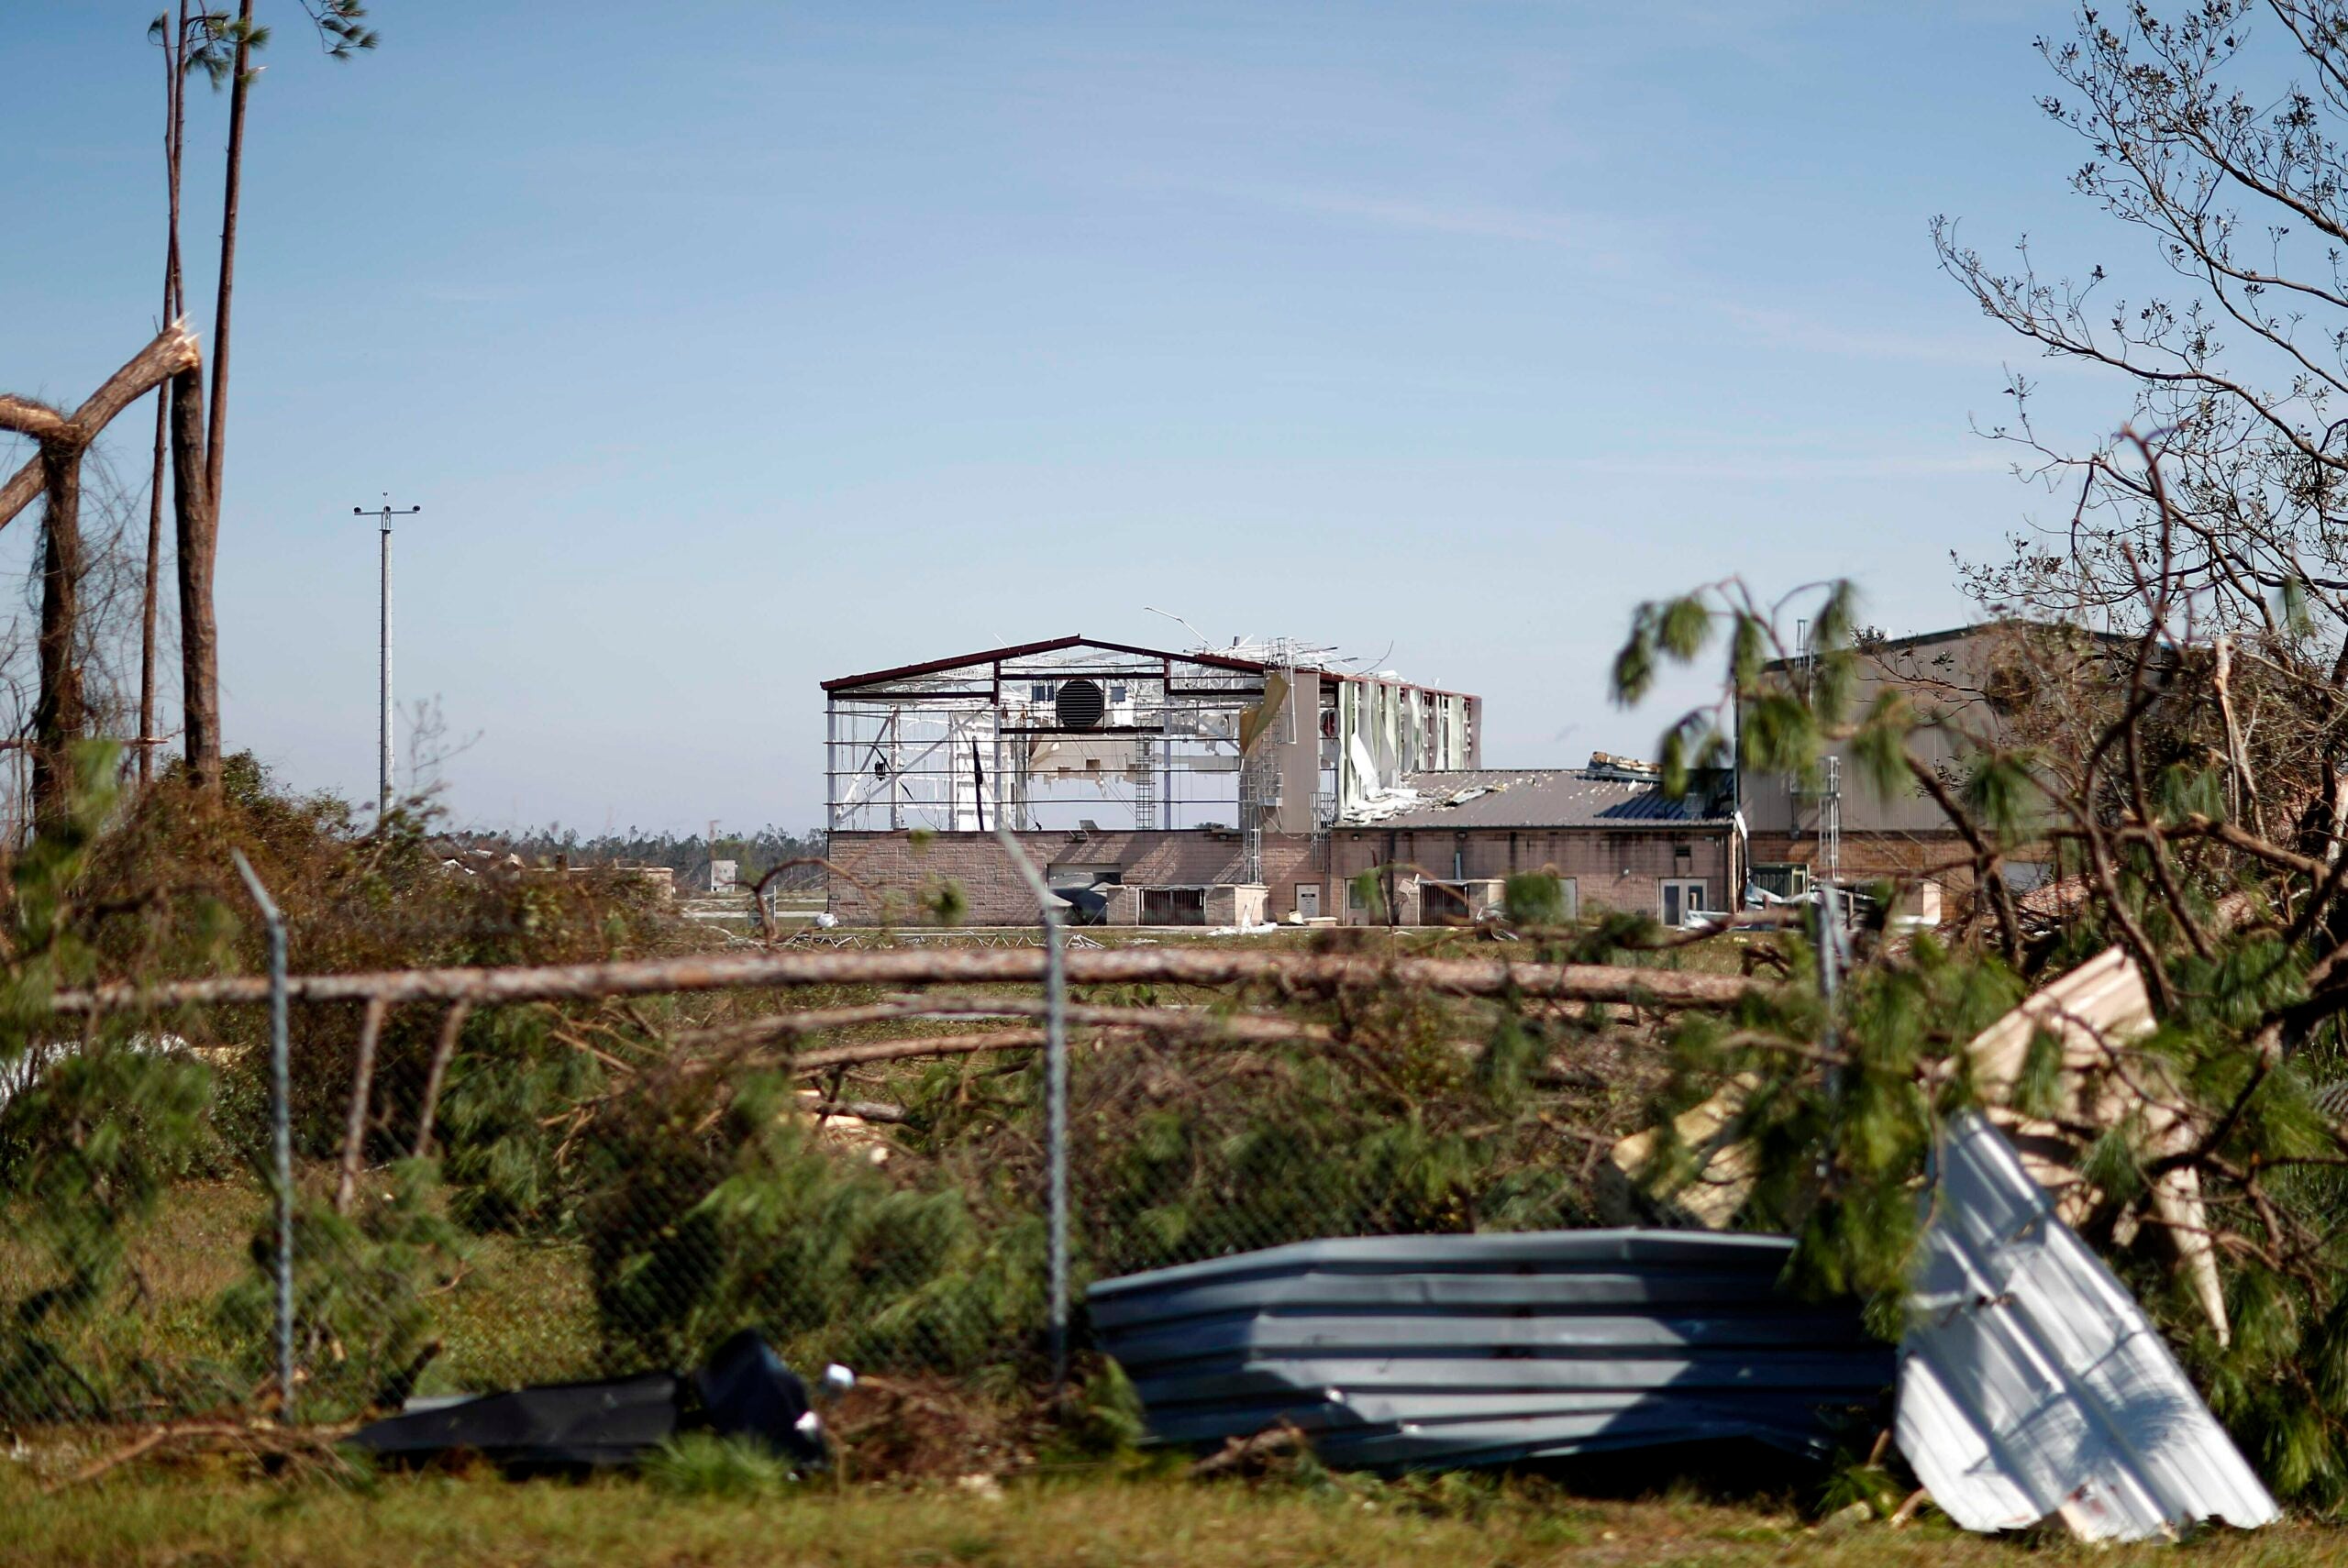 FILE - In this Oct. 11, 2018, photo, an airplane hanger at Tyndall Air Force Base is damaged from hurricane Michael in Panama City, Fla. The U.S. military long has formally recognized climate change as a threat to national security. That's in part because of the impact that intensifying floods, wildfires, extreme heat and other natural disasters are having and will have on U.S. installations and troops around the world. (AP Photo/David Goldman, File)